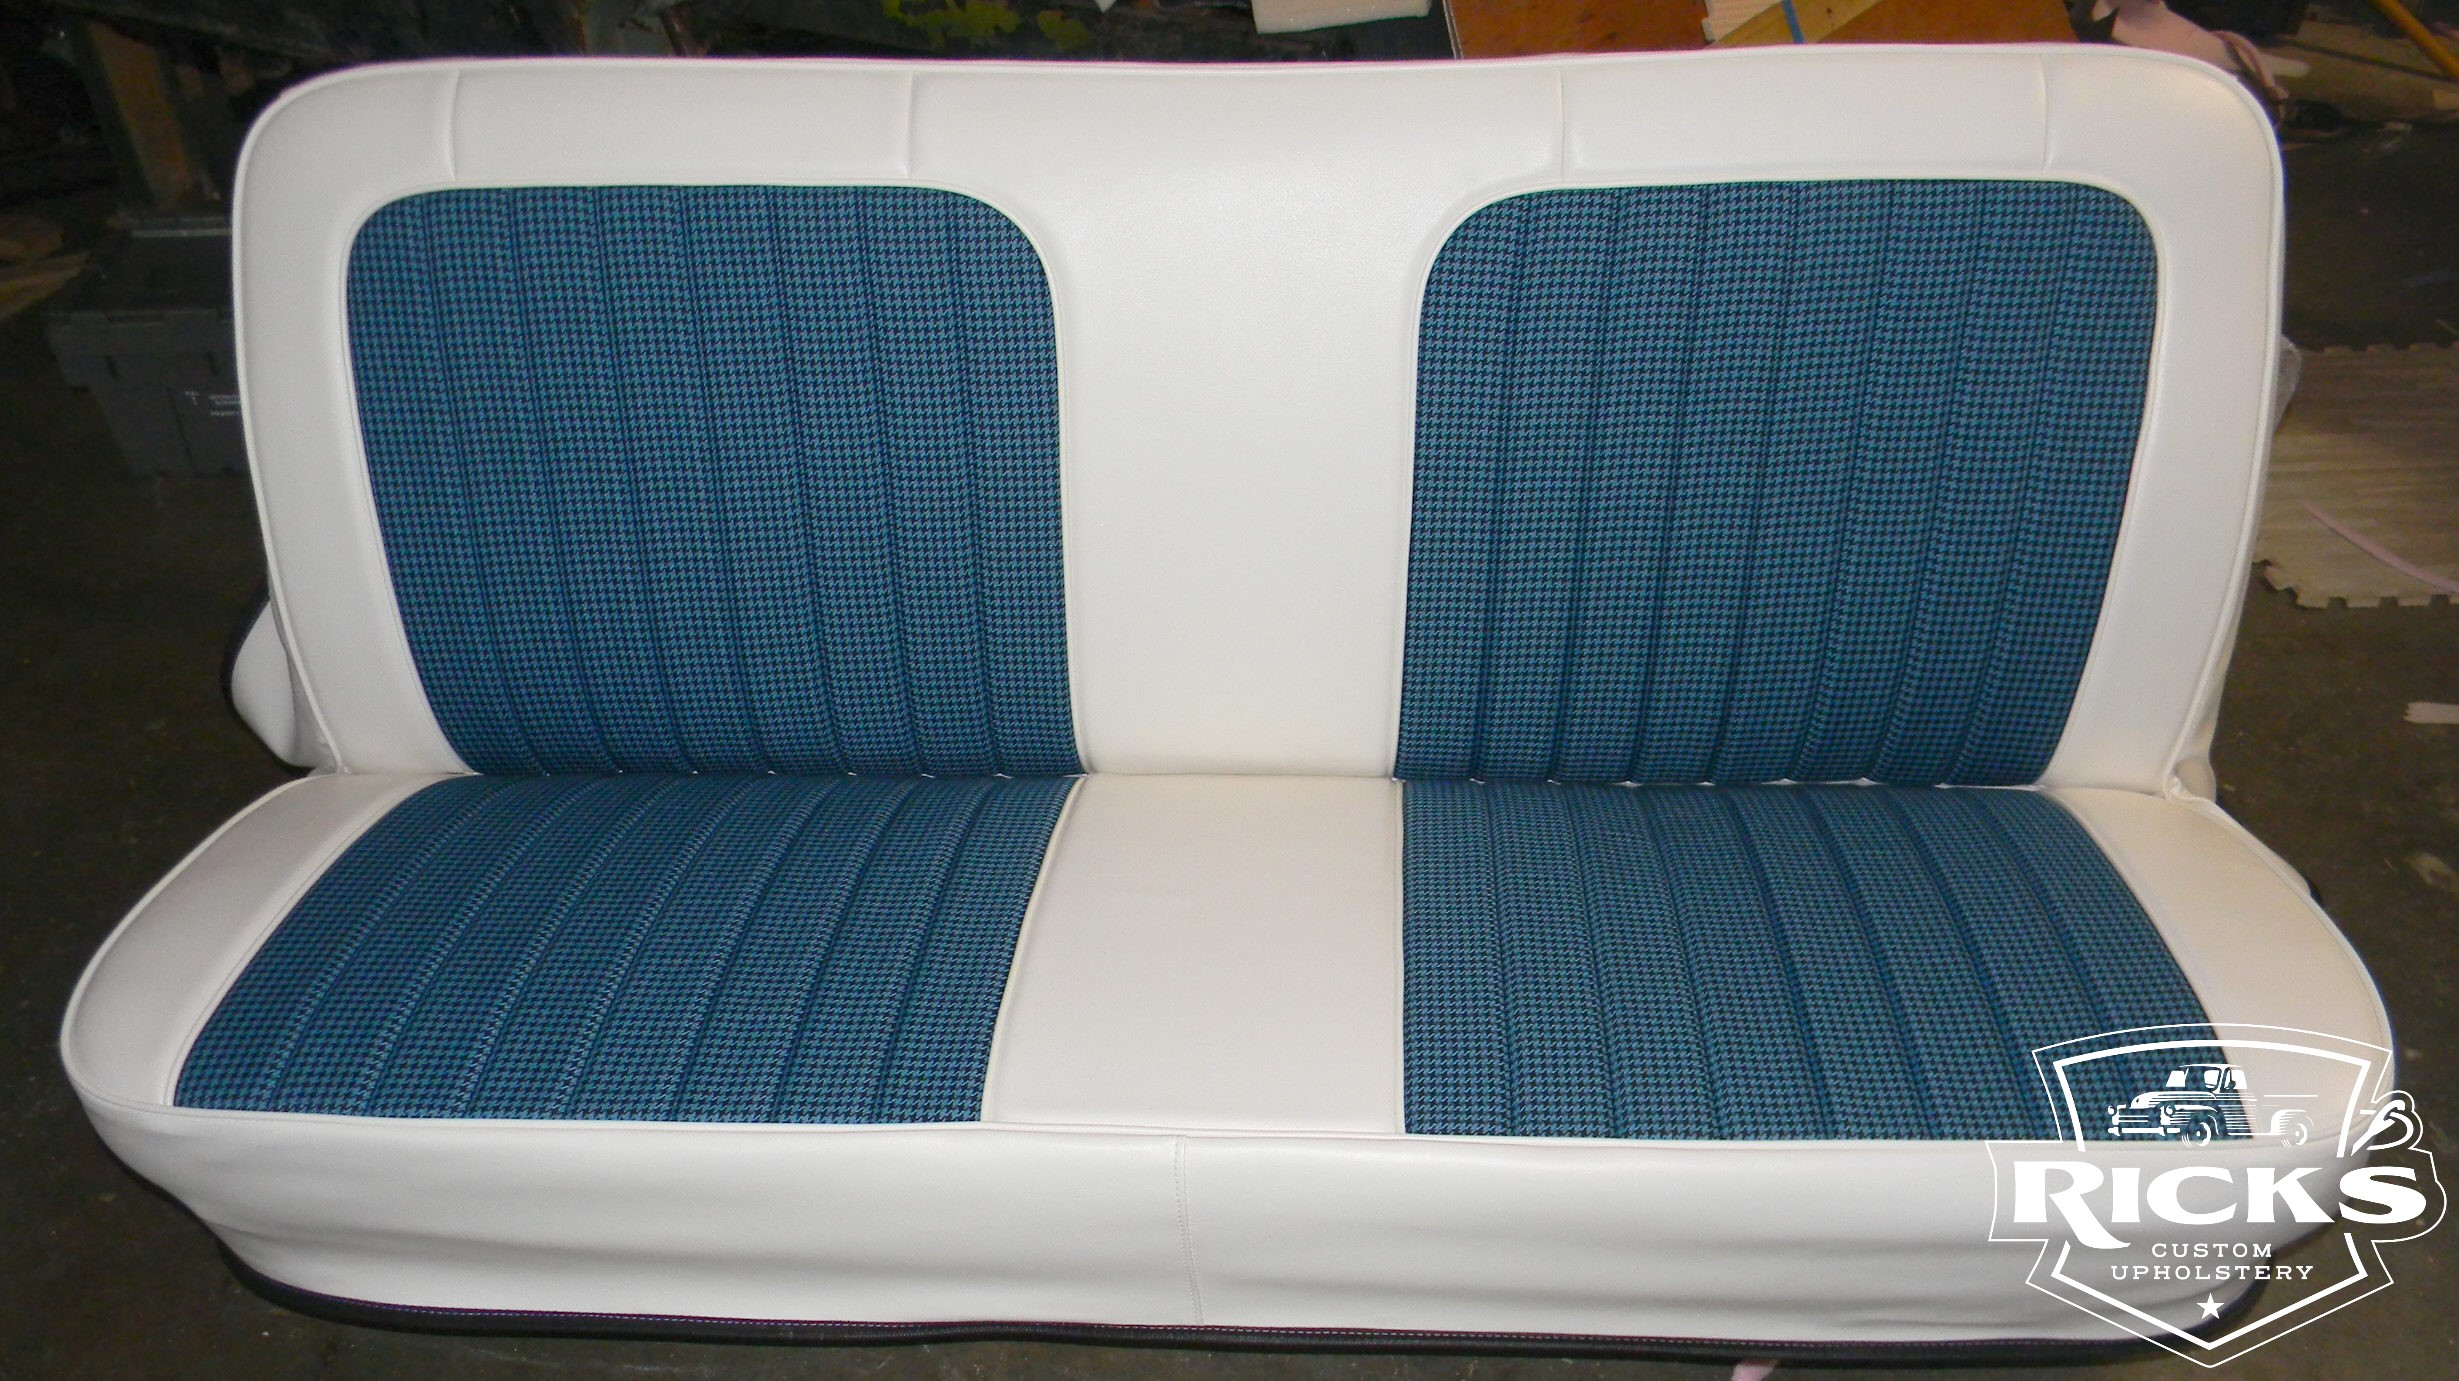 72 Chevy Houndstooth Seat Cover